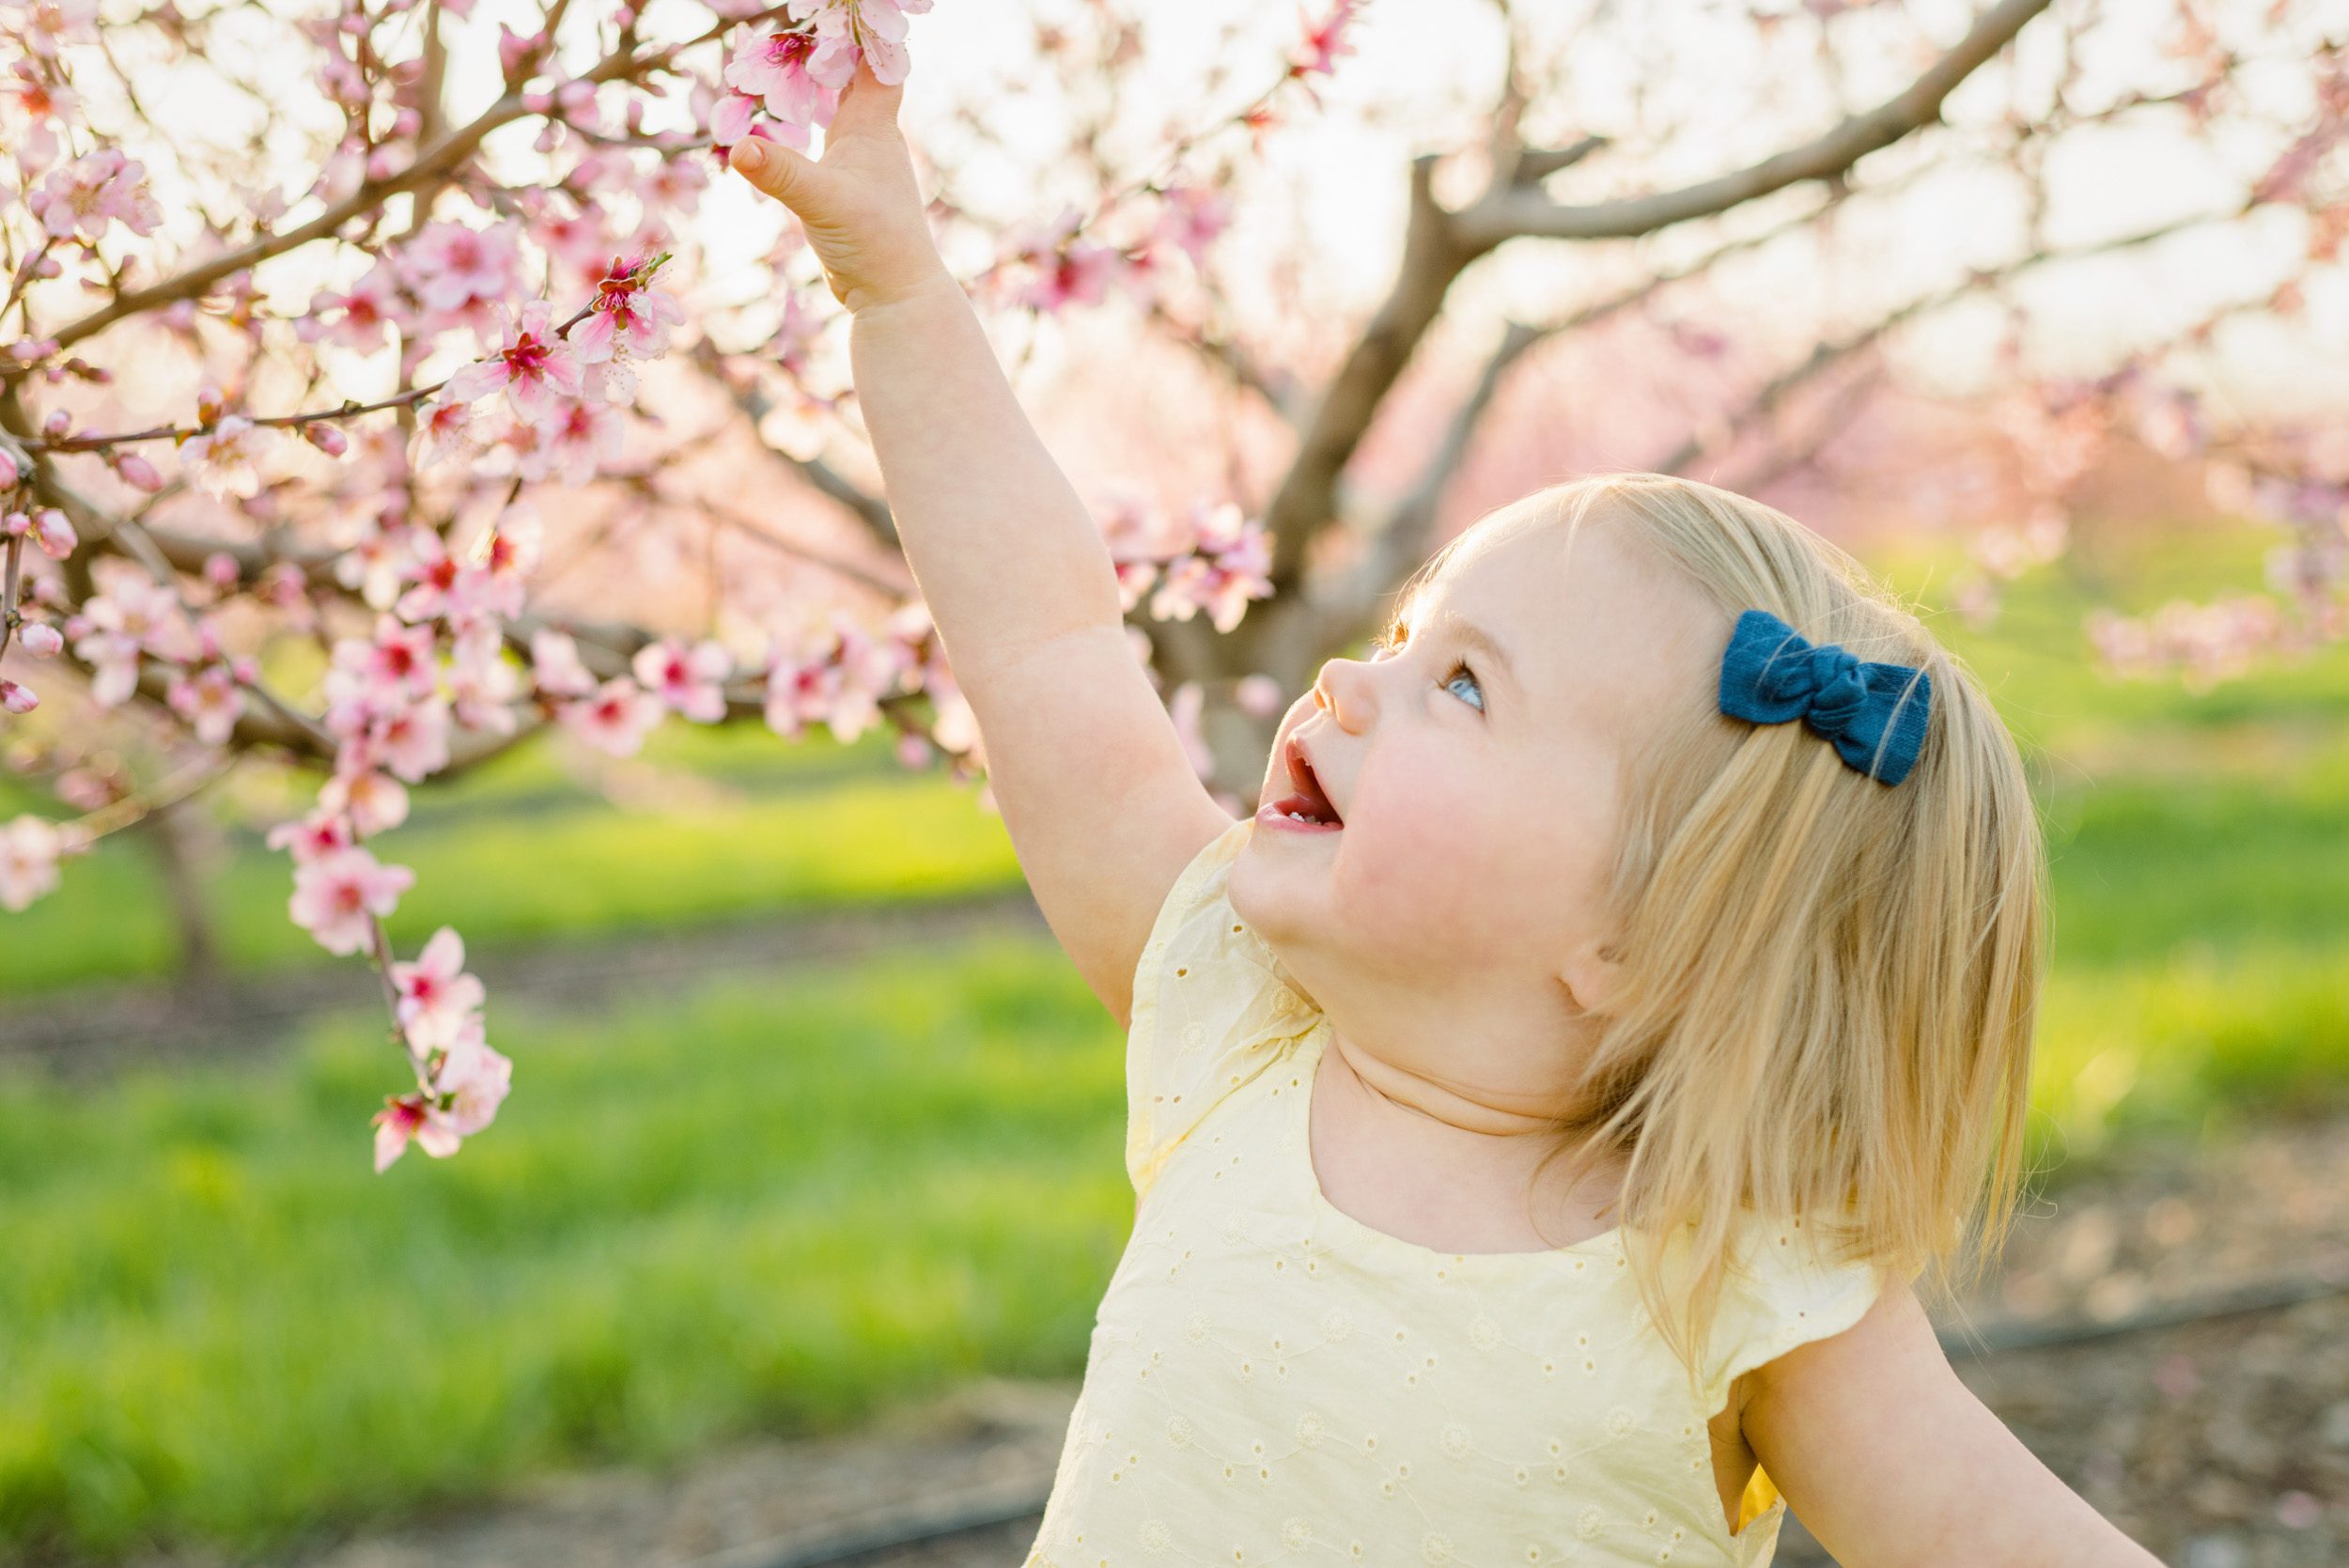 A little girl in a yellow dress smiling as she reaches up to touch pink blossoms on a peach tree at a family photoshoot